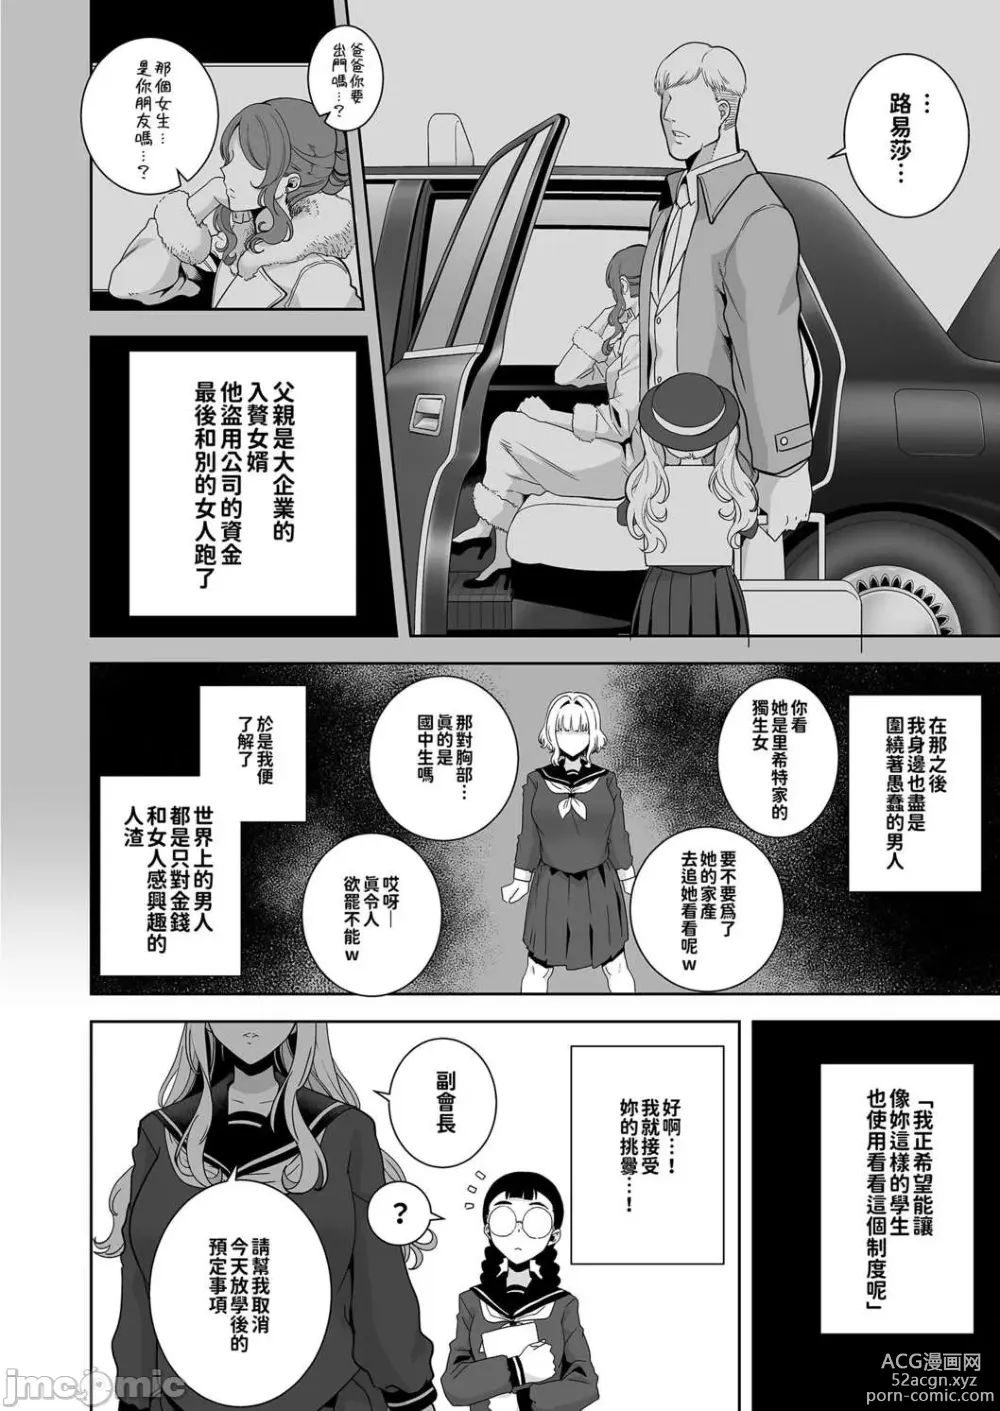 Page 6 of doujinshi 聖華女学院高等部公認竿おじさん 4